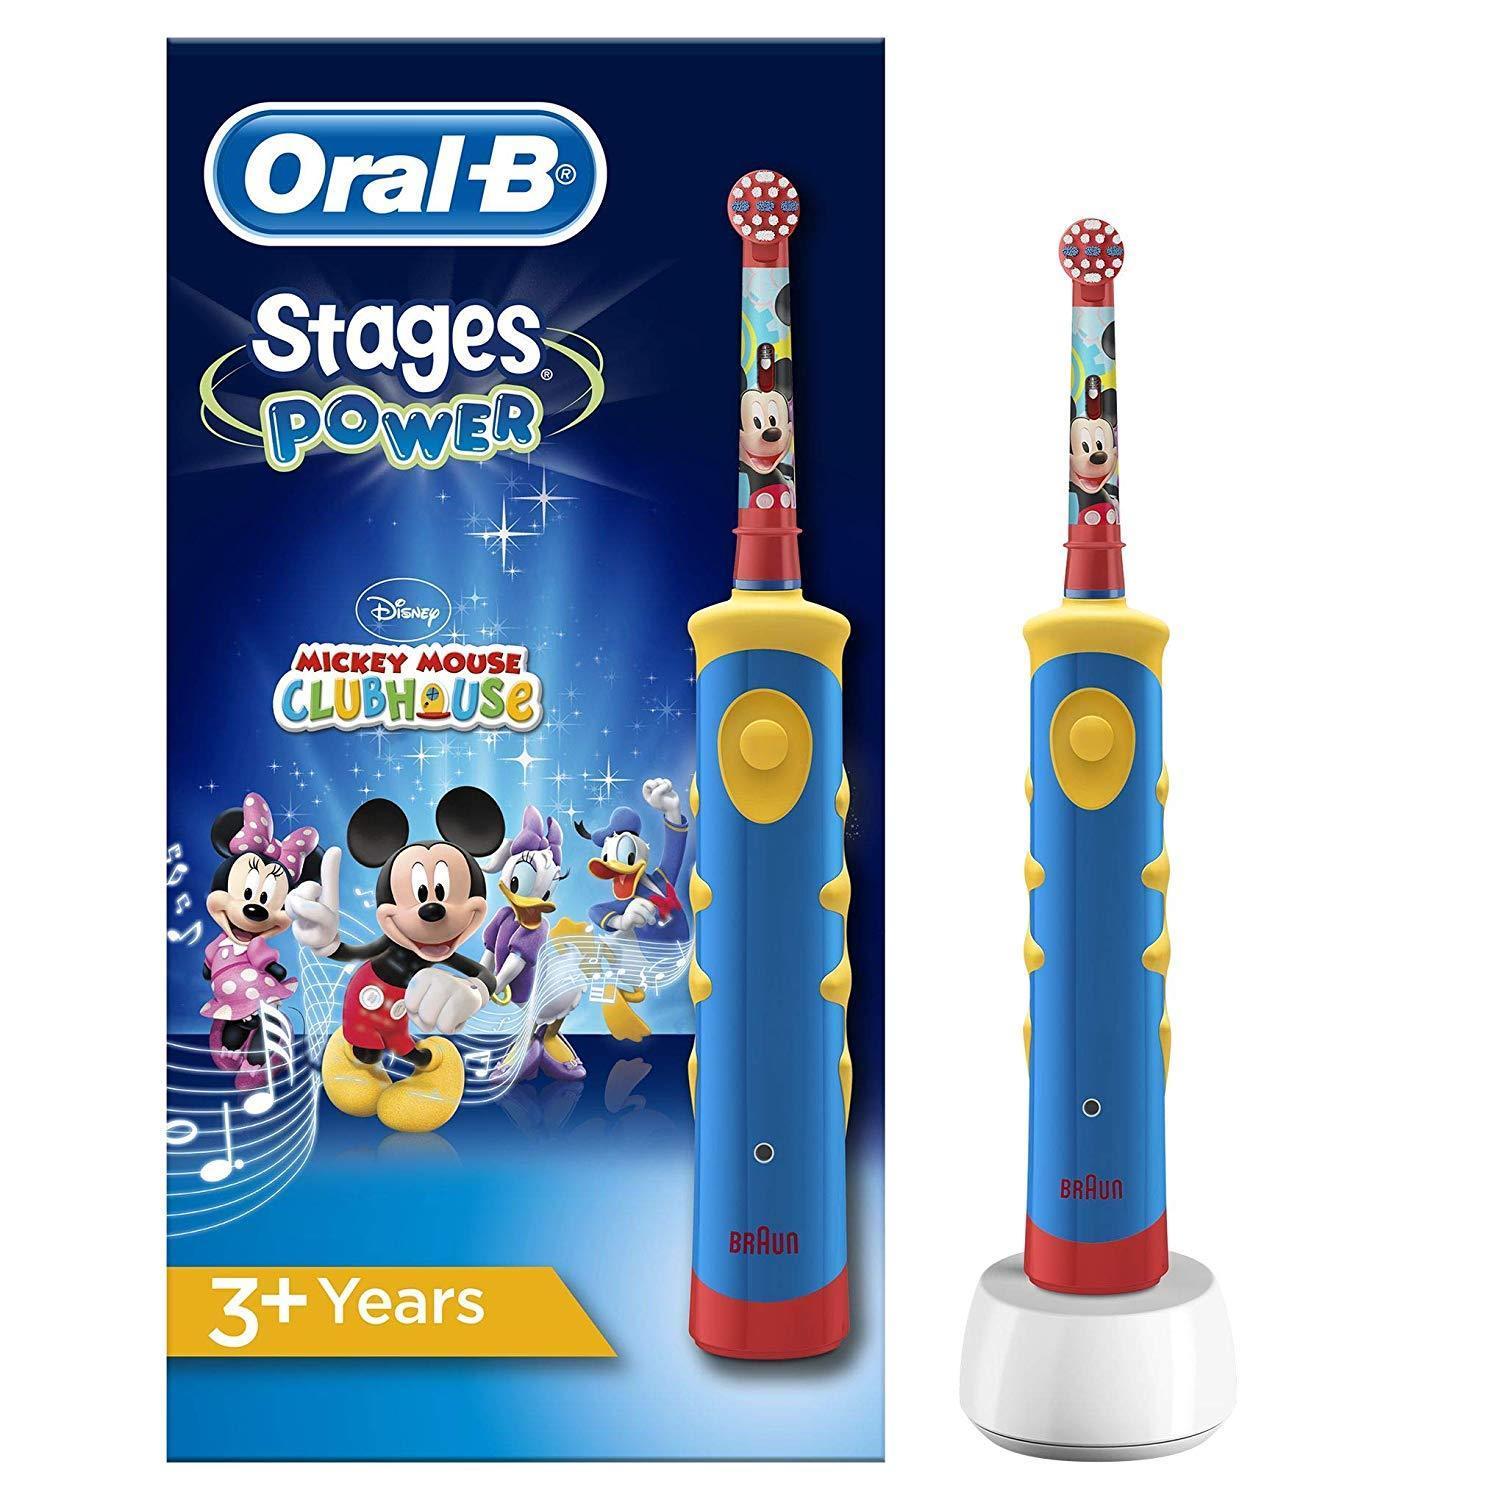 Musical toothbrush for toddlers